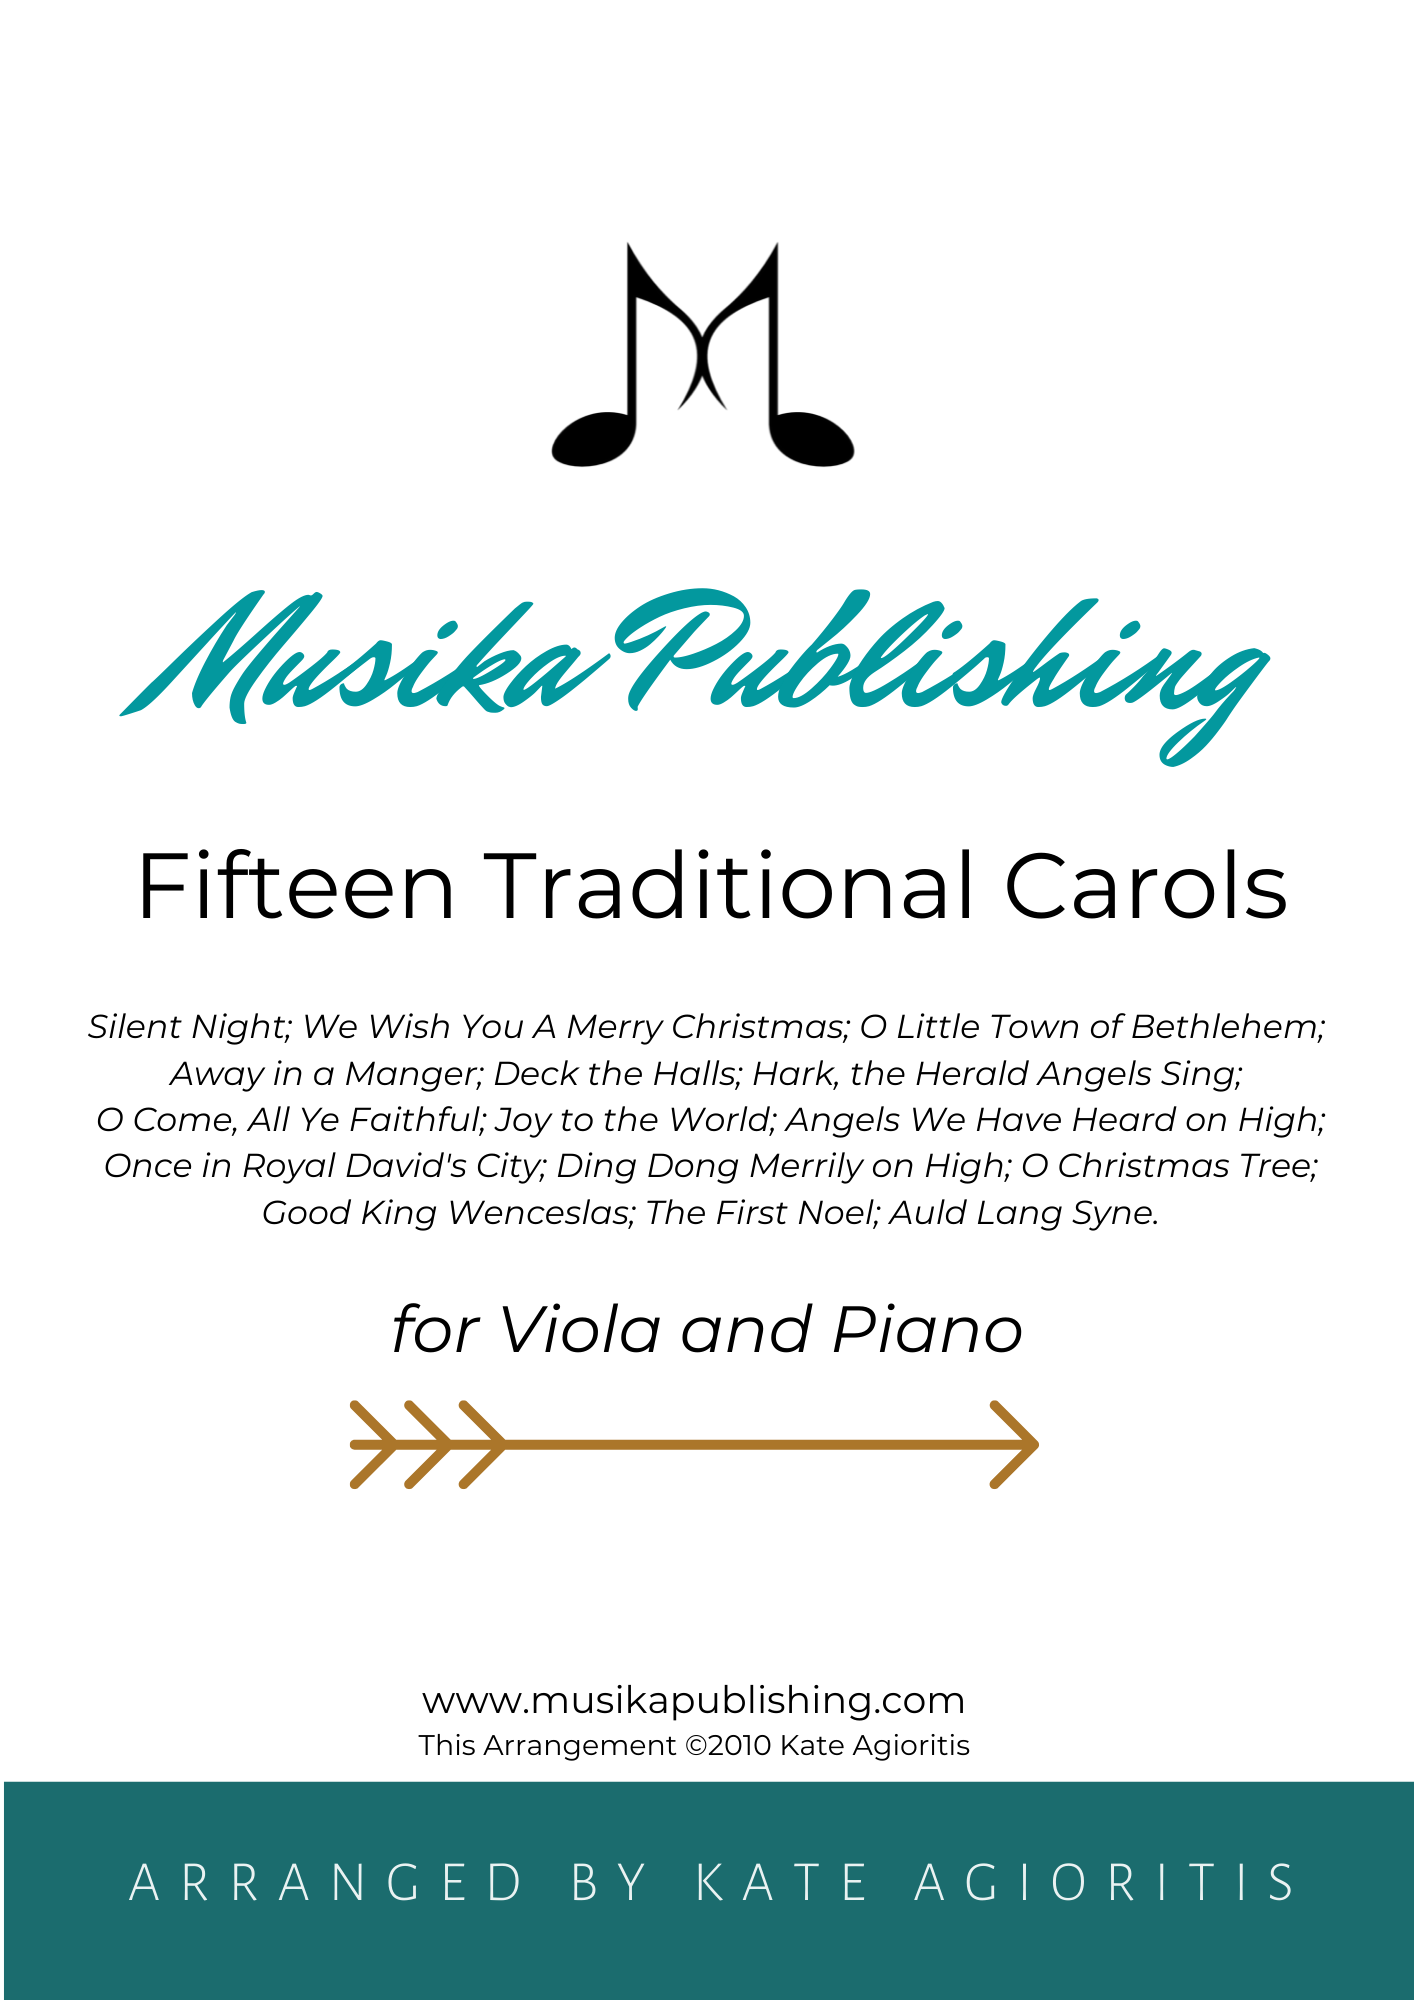 Fifteen Traditional Carols - for Viola and Piano